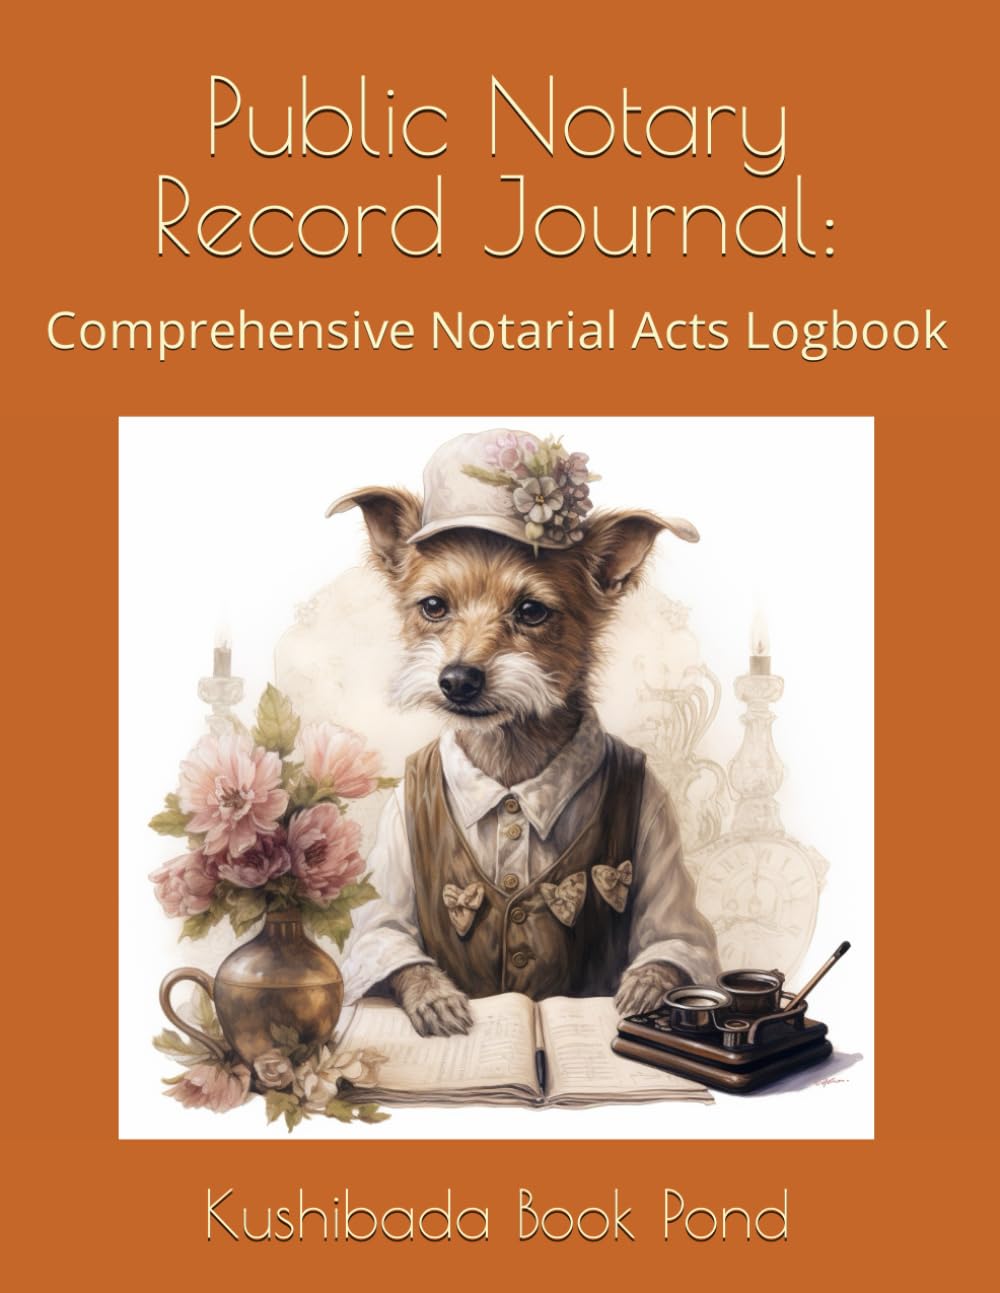 Public Notary Record Journal: Ultimate 8.5x11 Notarial Acts Logbook - Over 100 Pages of Comprehensive & Secure Record-Keeping for Professional Notaries 📚